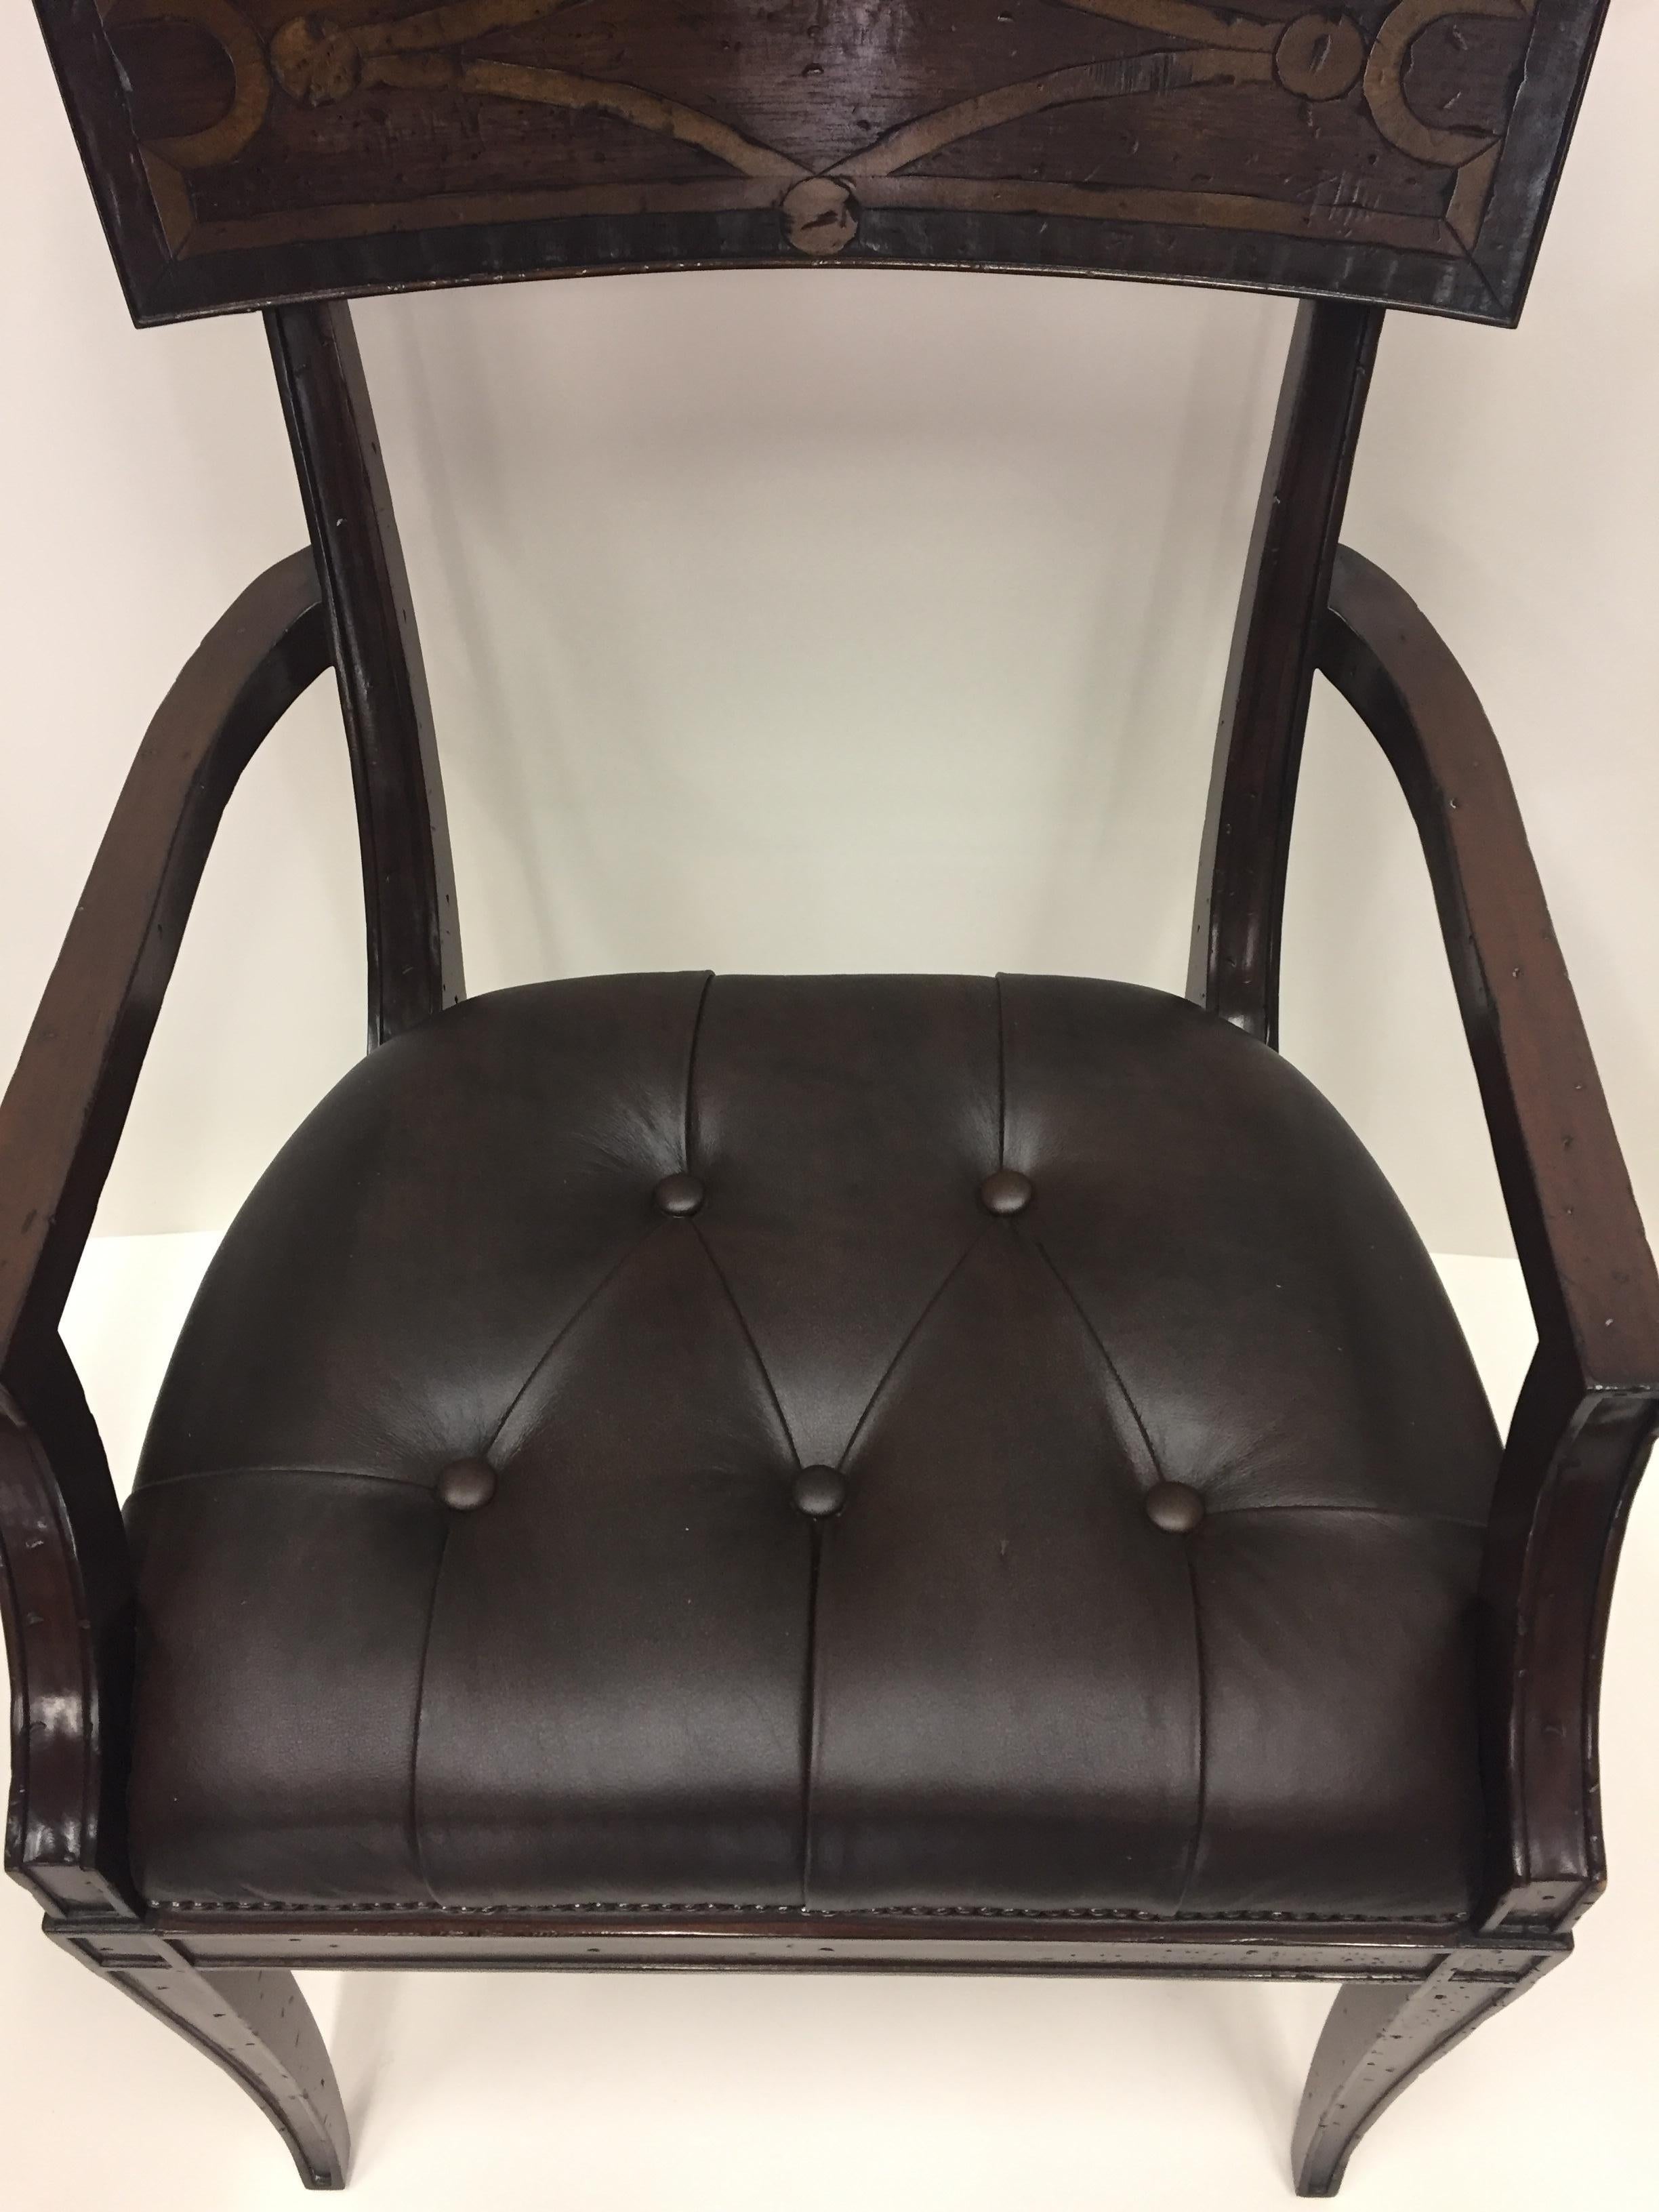 Rich looking Regency style armchair having mahogany carved and inlaid back with elegantly shaped arms and tapered legs, handsomely upholstered with a tufted chocolate brown leather seat.